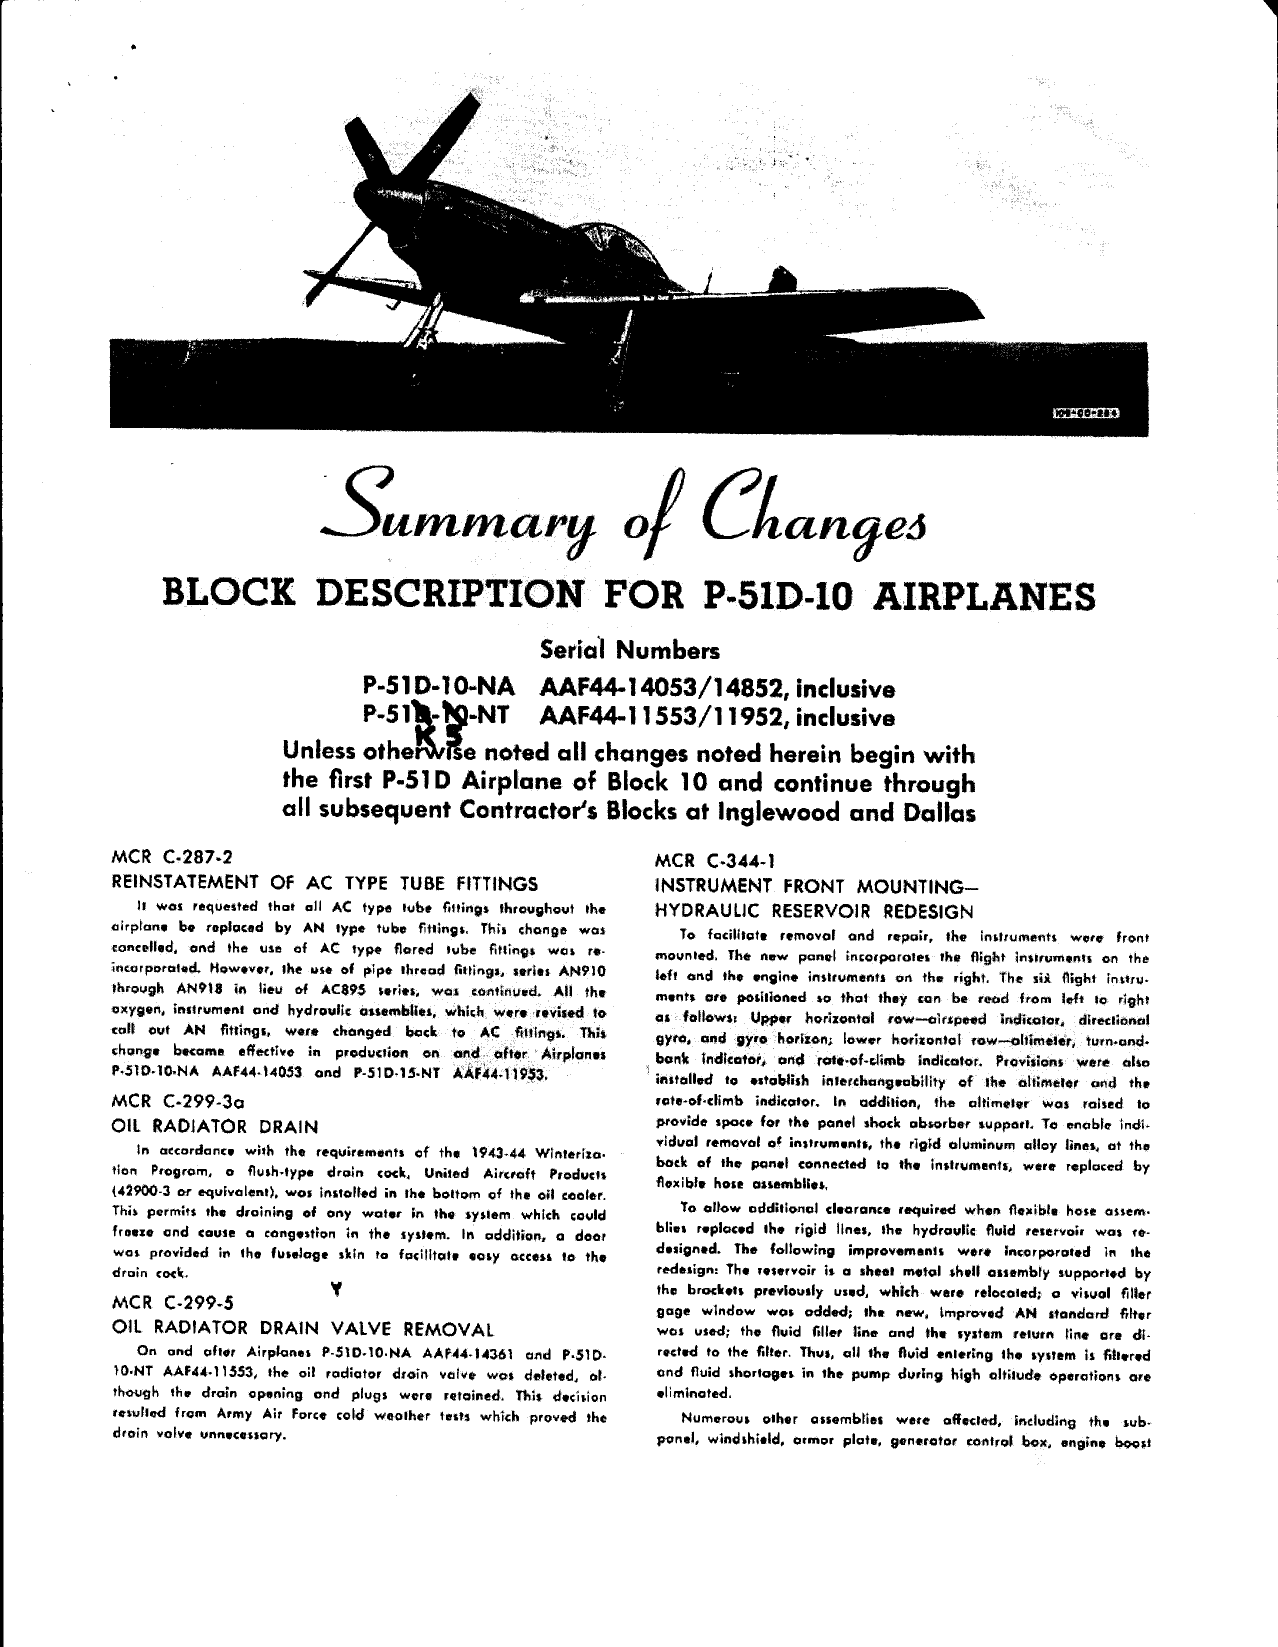 Sample page 1 from AirCorps Library document: Summary of Changes - Block Description for P-51D-10 Airplanes